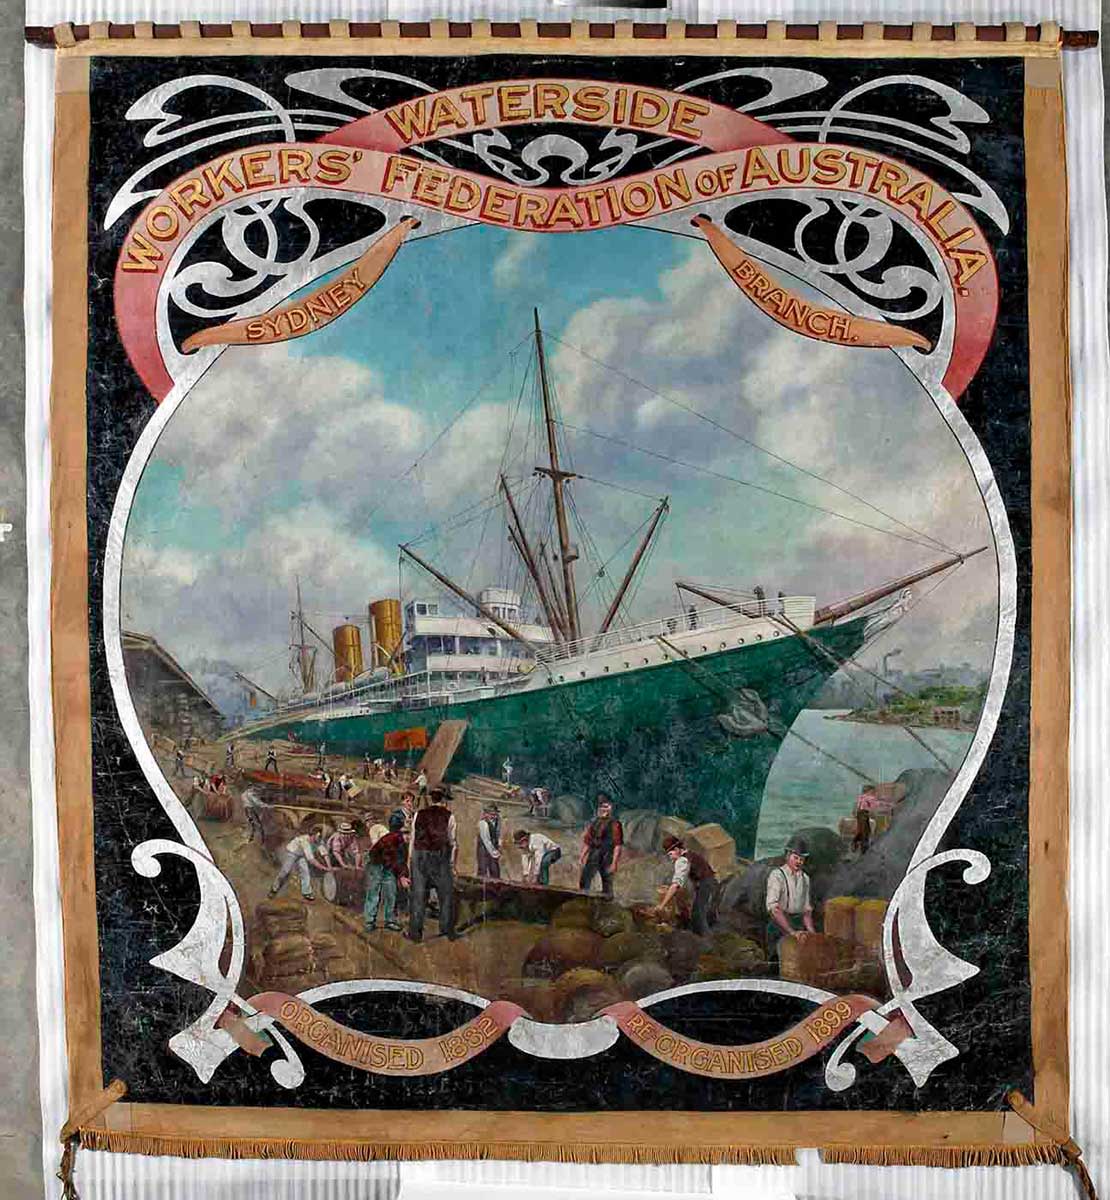 Large almost square banner painted in oil colours, showing a central image of a ship docked beside a busy wharf. 'Waterside Workers' Federation of Australia' and 'Sydney branch' is written at the top. At the bottom the text reads 'Organised 1882', 'Re-organised 1899'. - click to view larger image